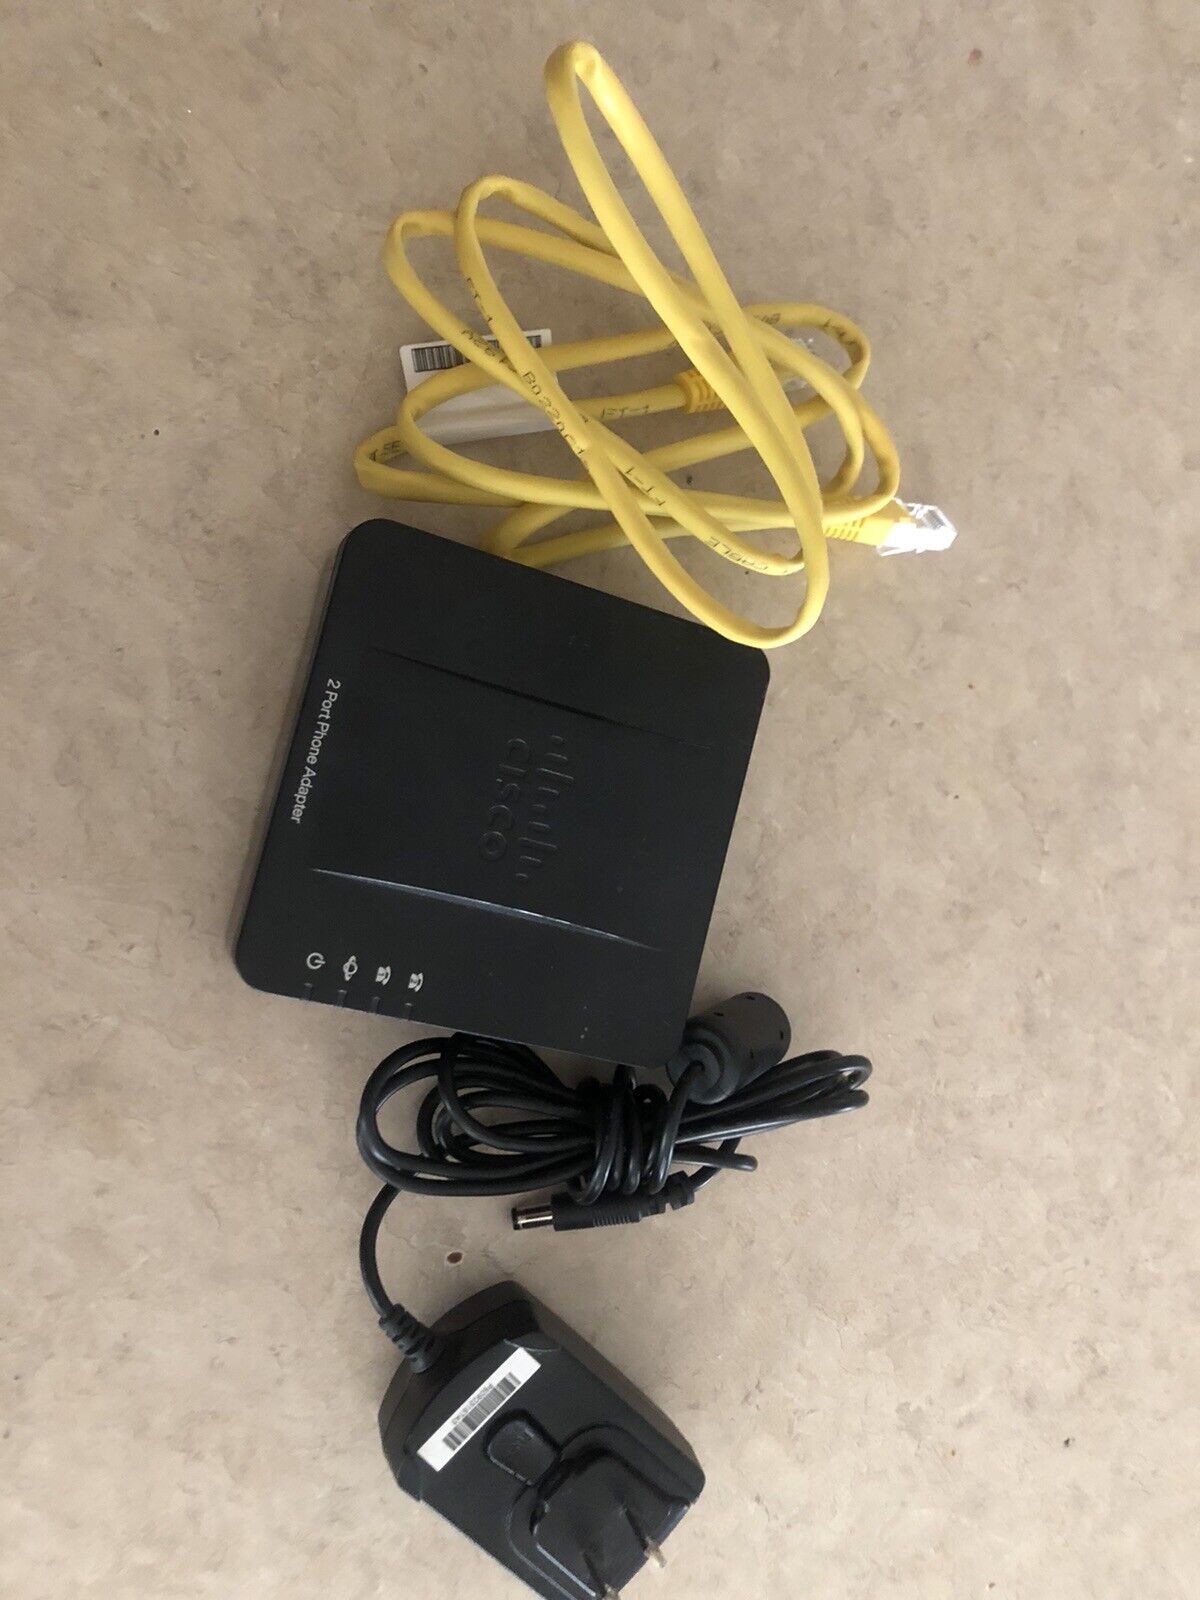 Cisco SPA112 2 Port Phone Adapter+ AC adapter and Cable￼